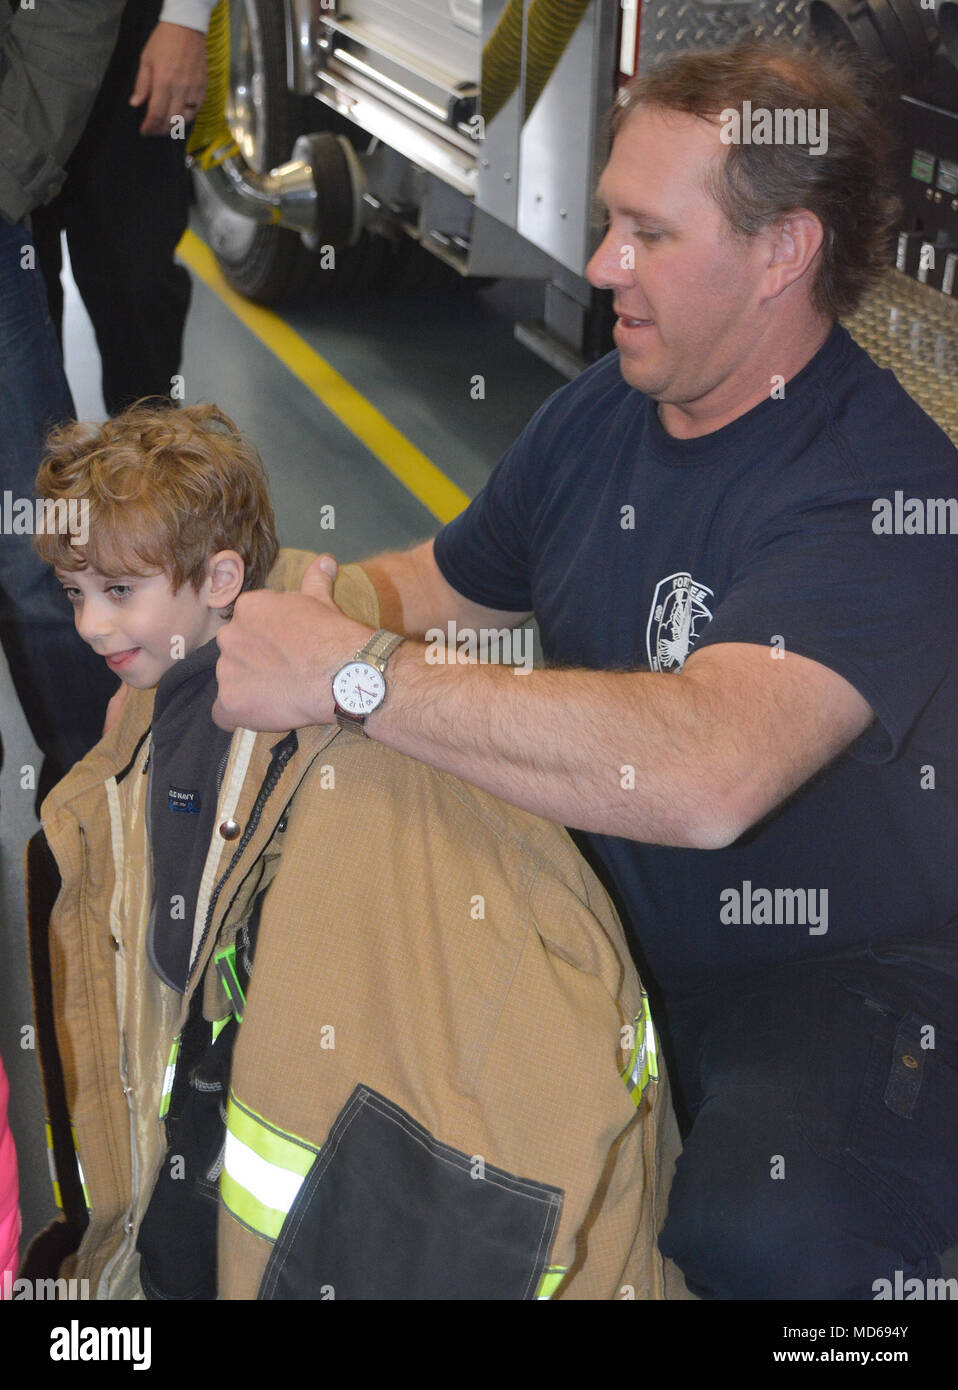 Fort Lee Firefighter Jim Hazlitt helps Michael Lambeth, a student from Harrison Elementary, try on a firefighter’s jacket to show him how heavy the suit is. Children from the K-5 special education program at Harrison Elementary in the Prince George School District toured Fire Station No. 2 March 26. Several firefighters were on hand to show the students firetrucks, ambulances and fire-fighting gear. (Photo by Amy Perry, Fort Lee Public Affairs) Stock Photo